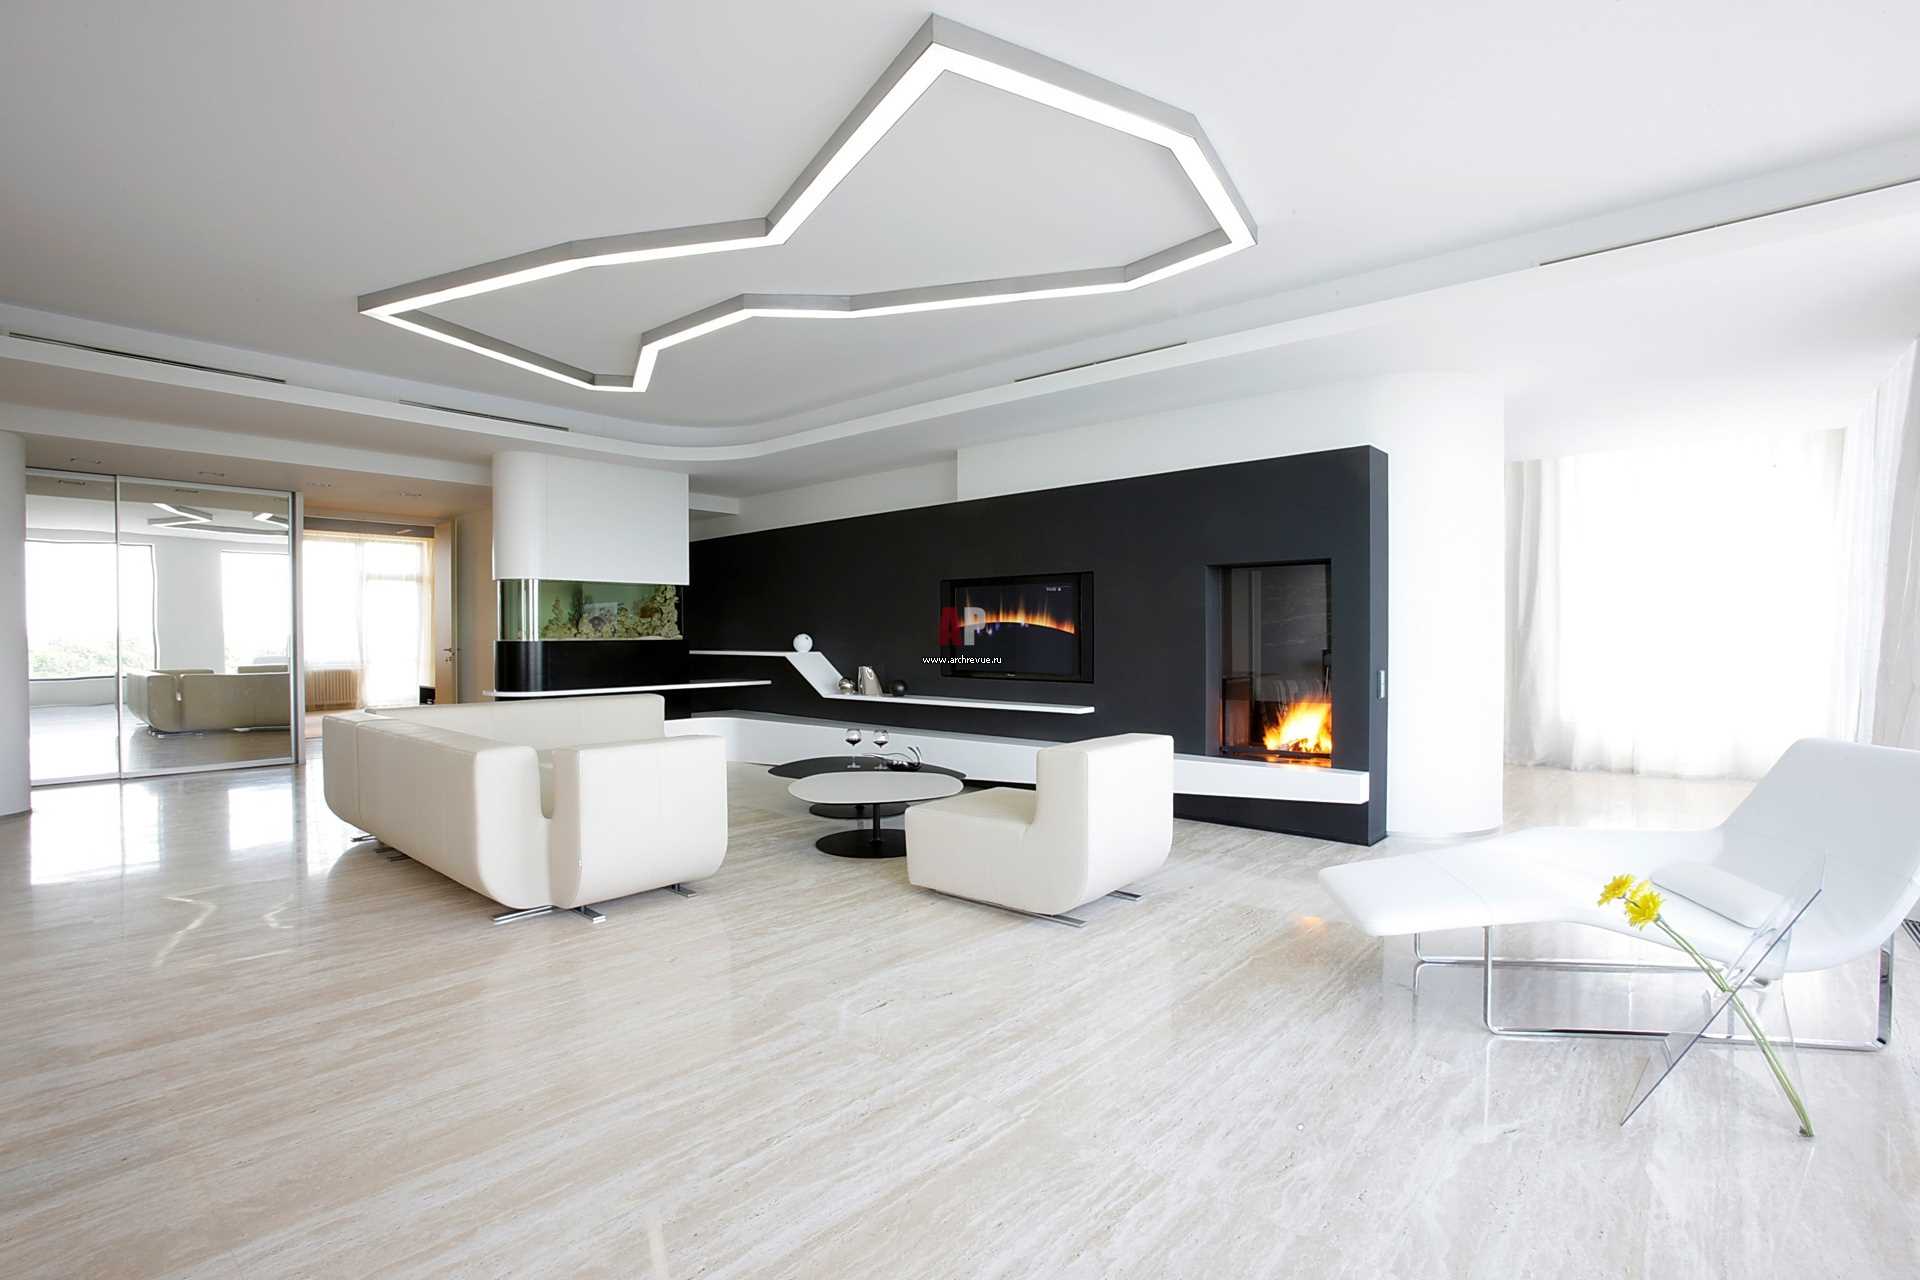 an example of a bright living room interior in the style of minimalism